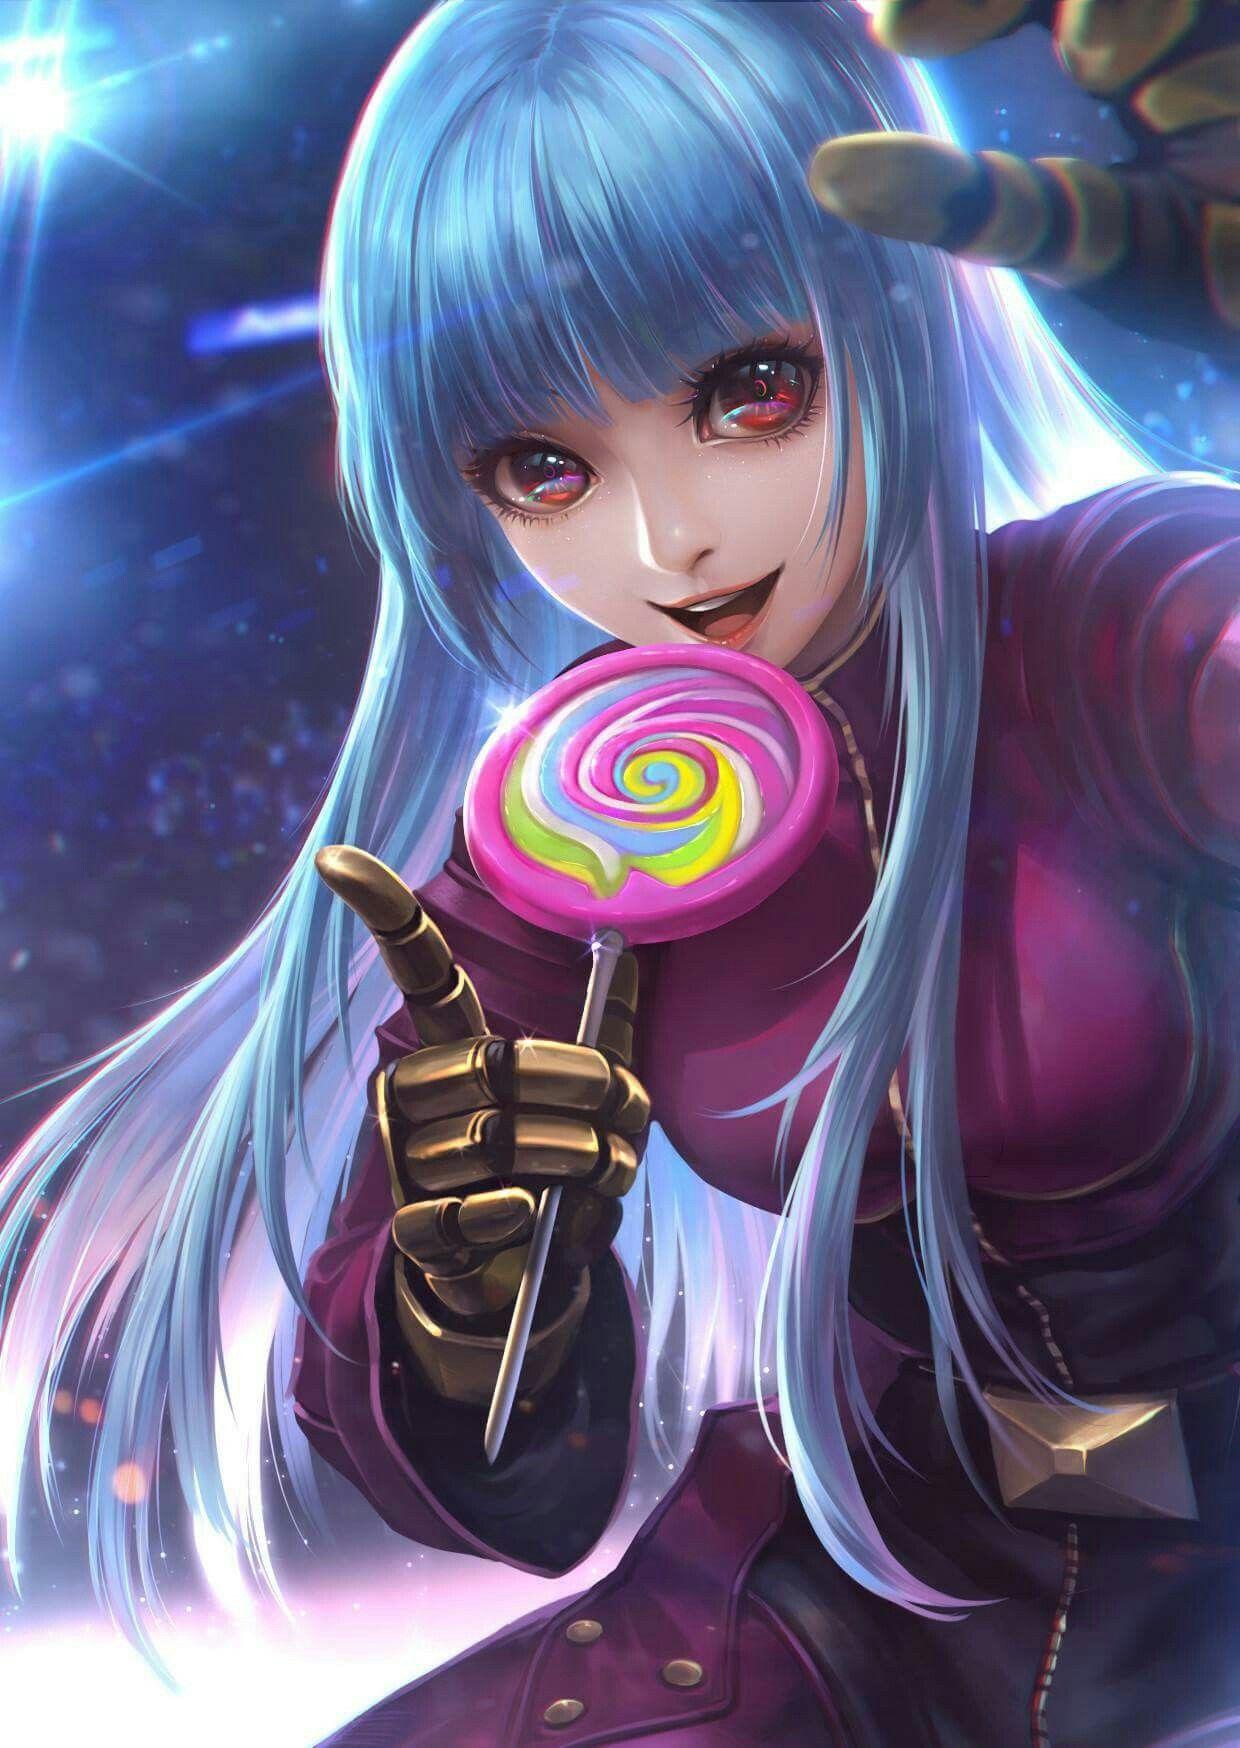 VG: SNK2. King of fighters, Kula